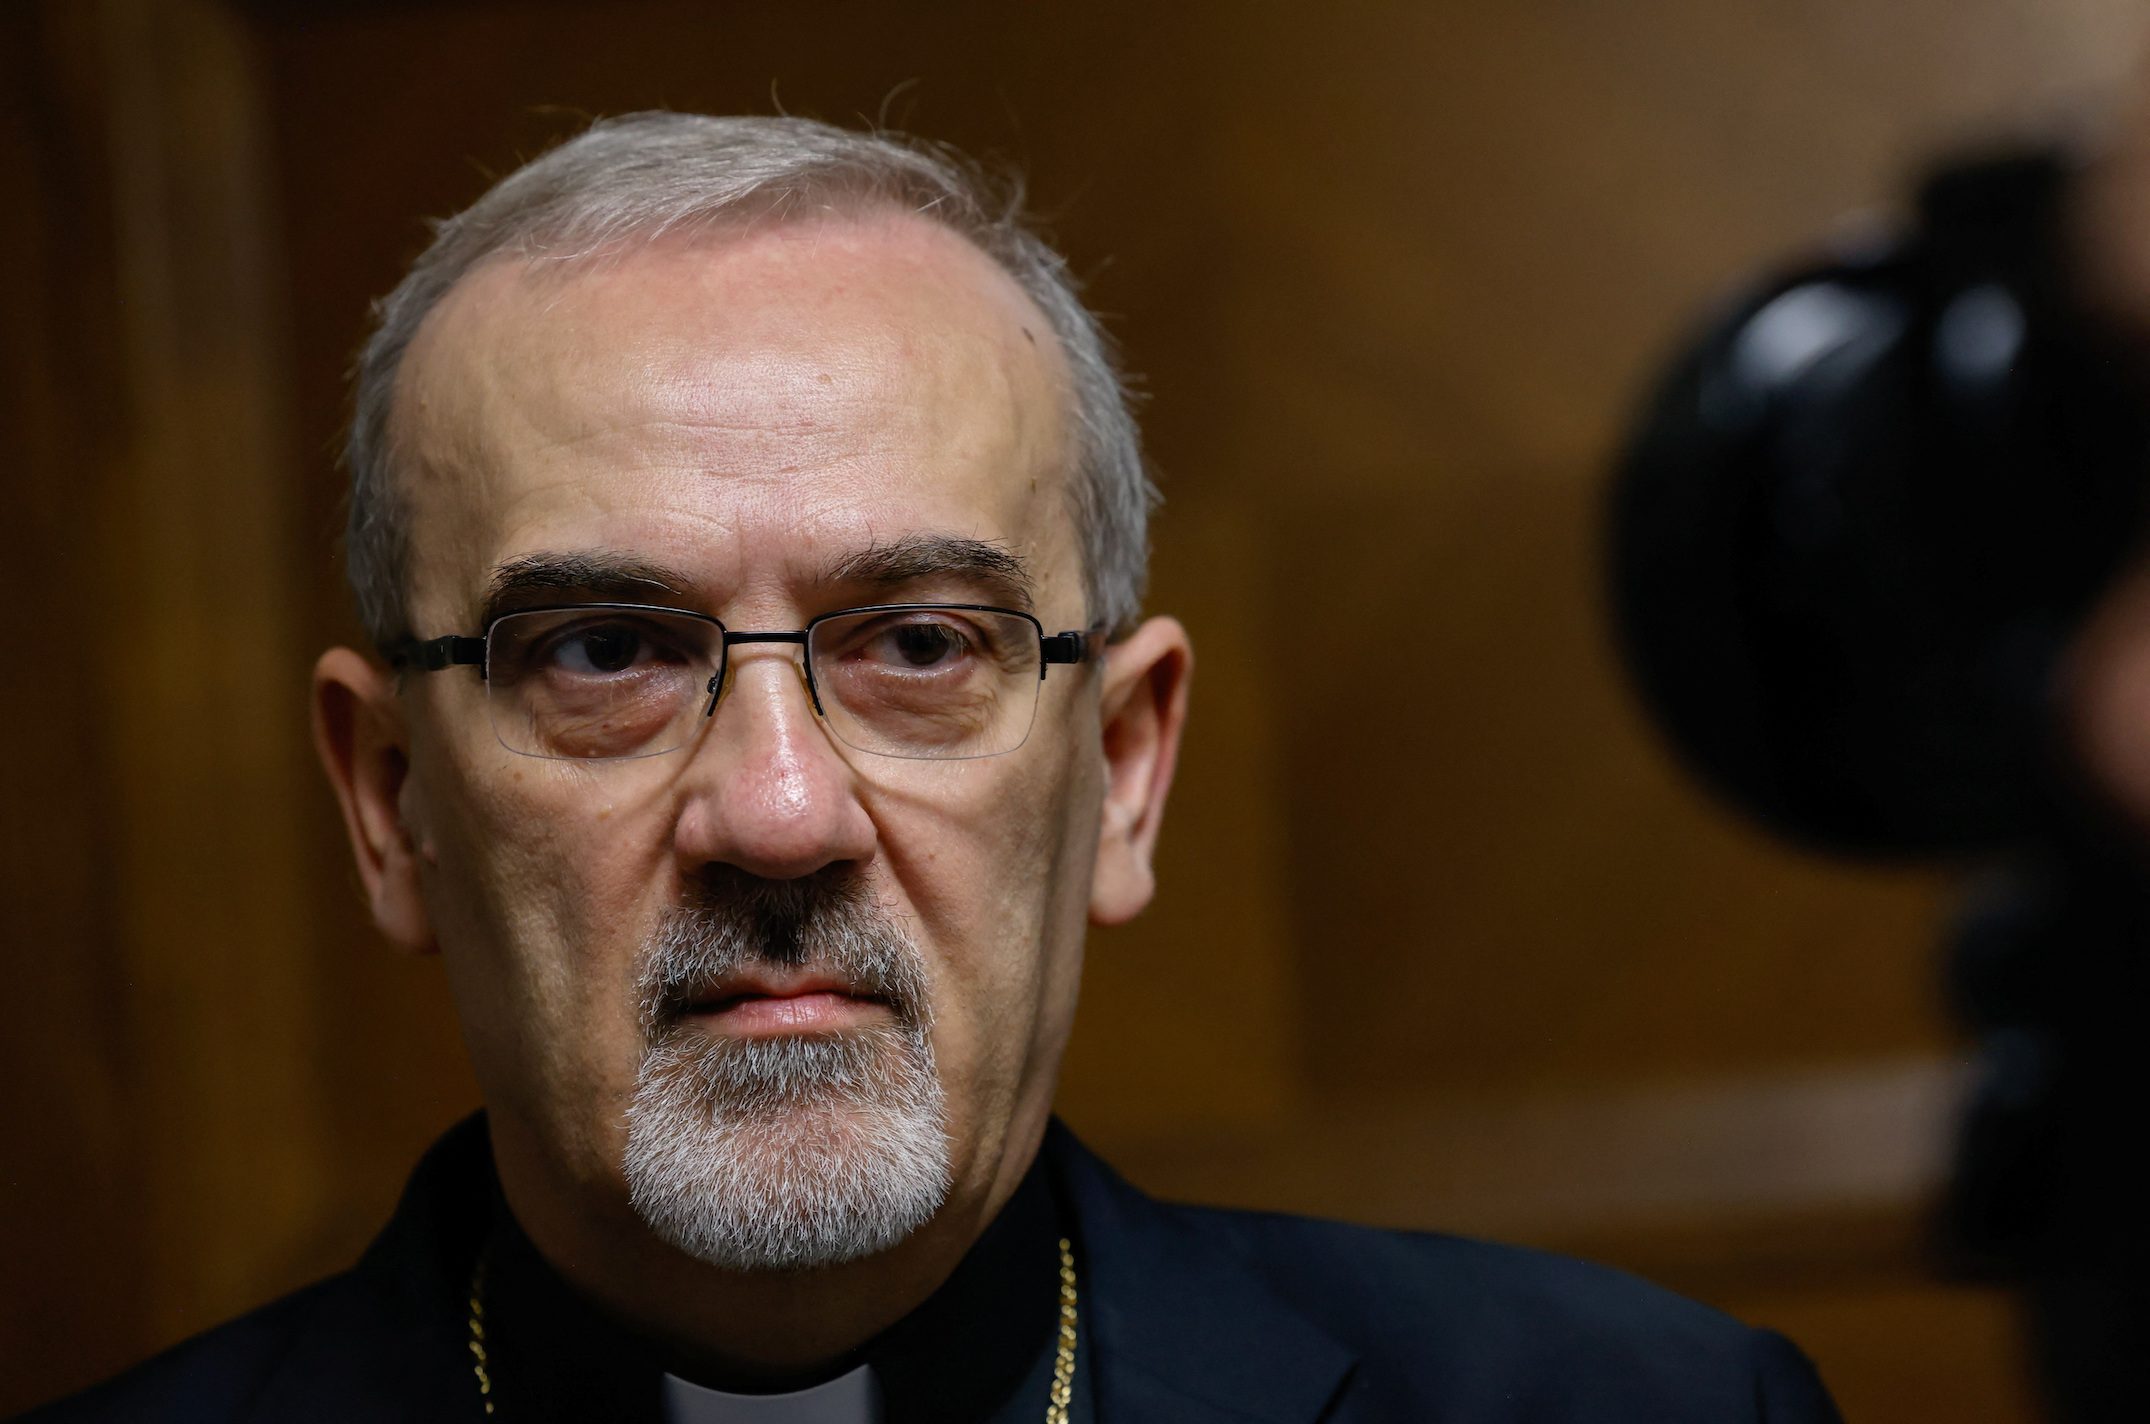 Jerusalem Catholic Patriarch offers to be exchanged for Gaza hostages